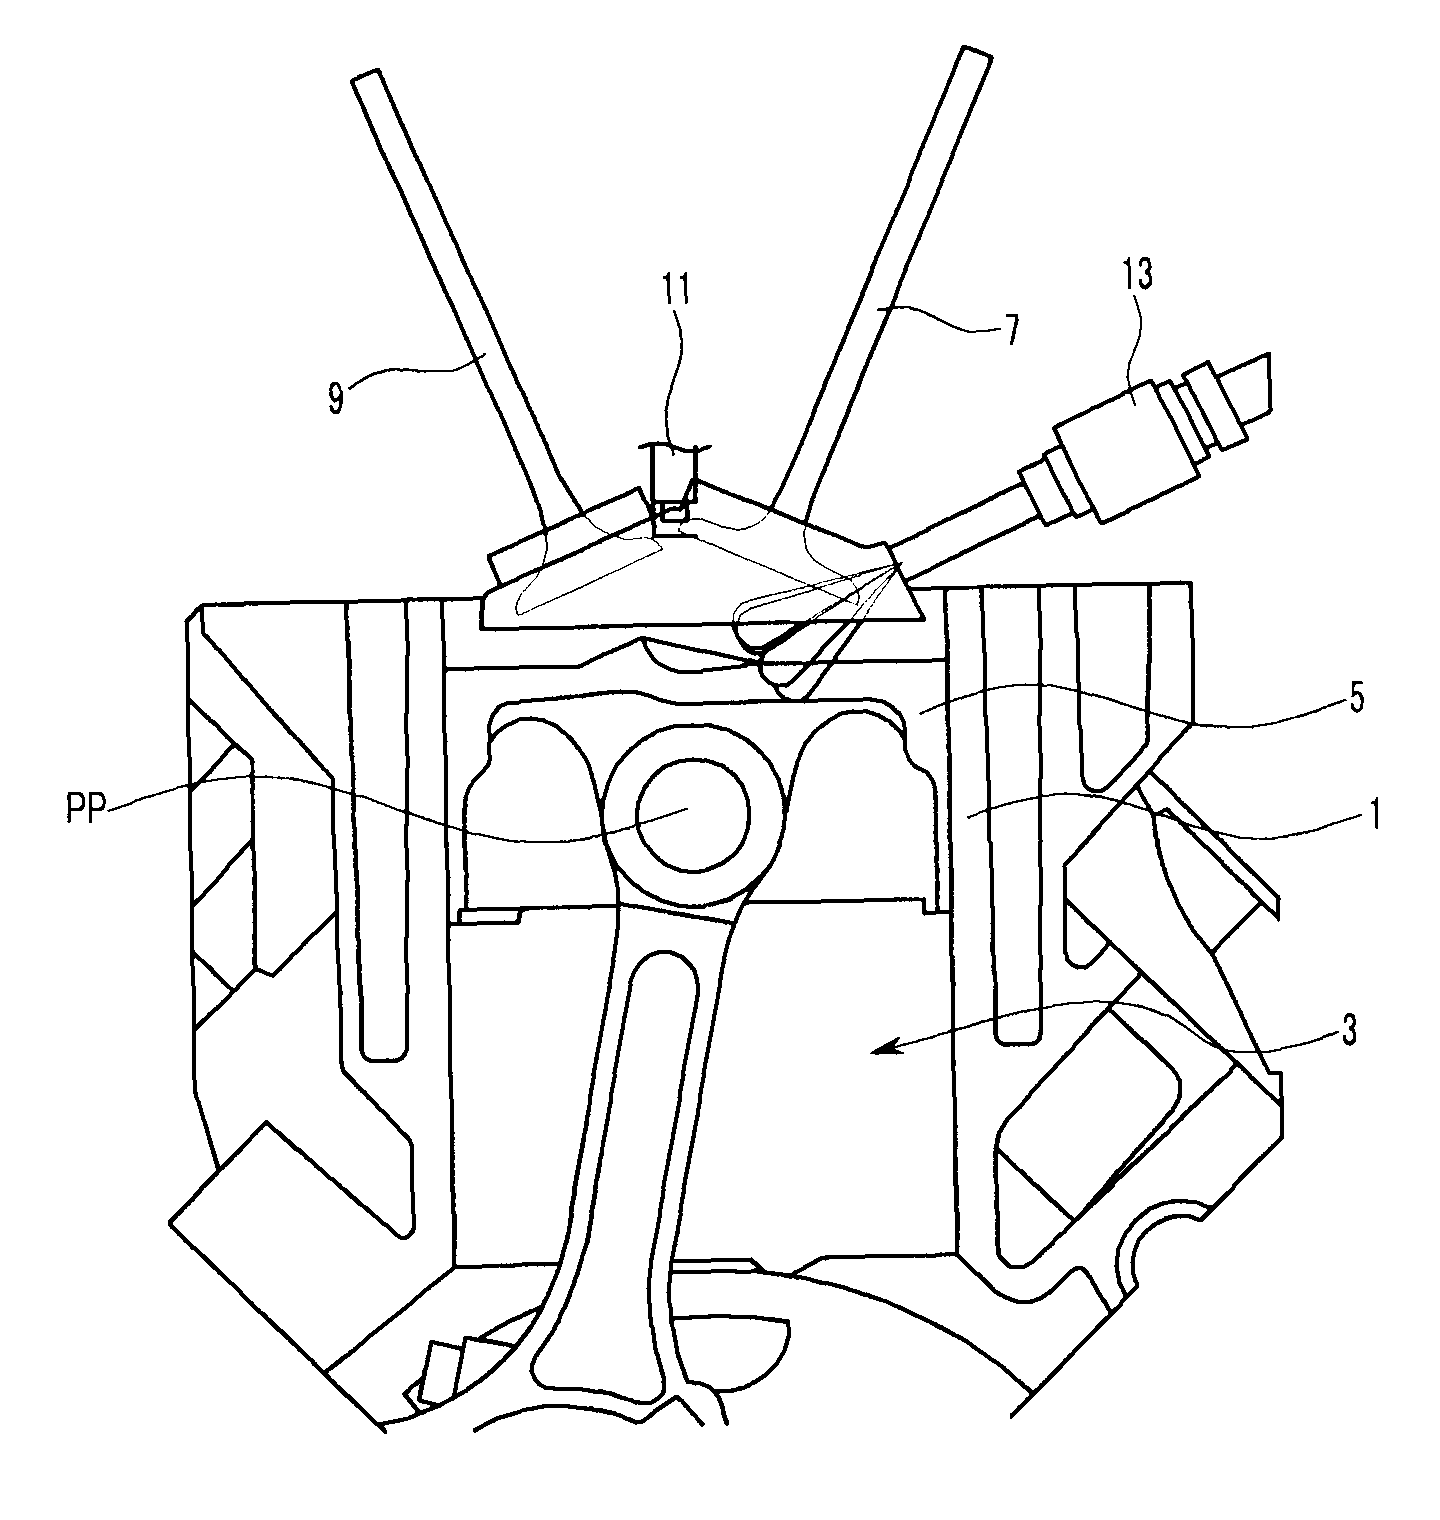 Piston of gasoline direct injection engine